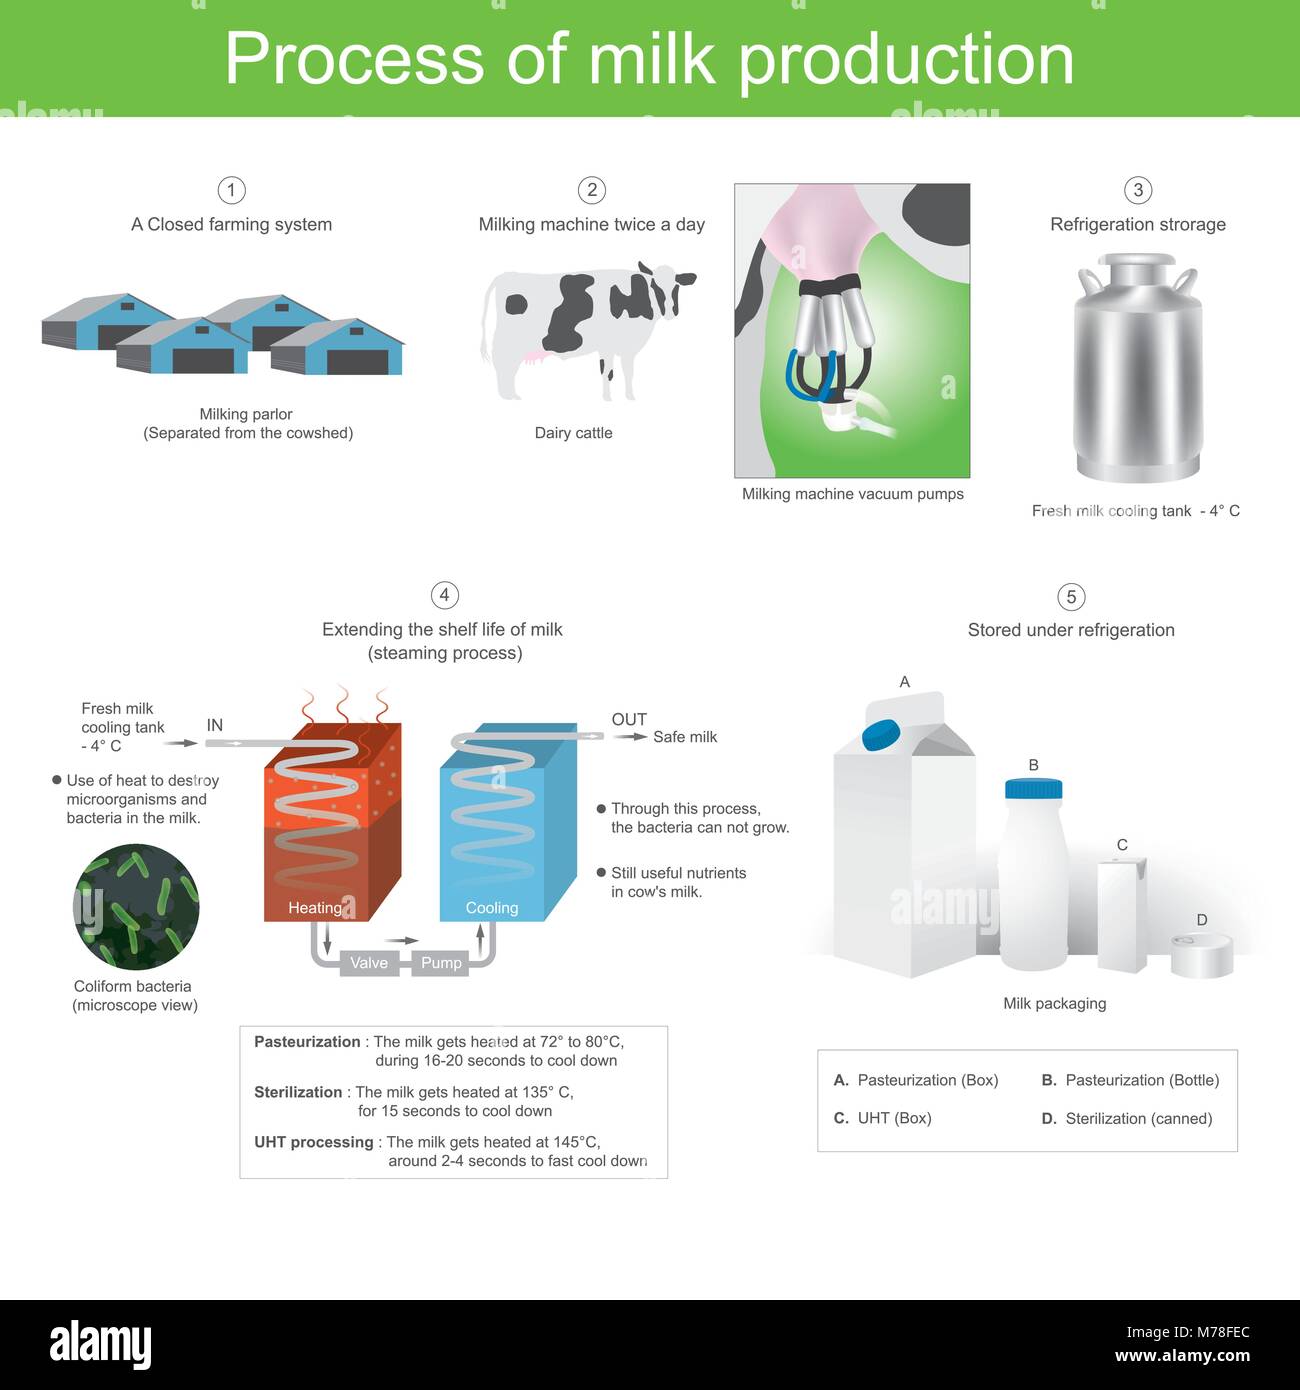 Use of heat to destroy microorganisms and bacteria in the milk. Through this process the bacteria can not grow. This process still useful nutrients in Stock Vector